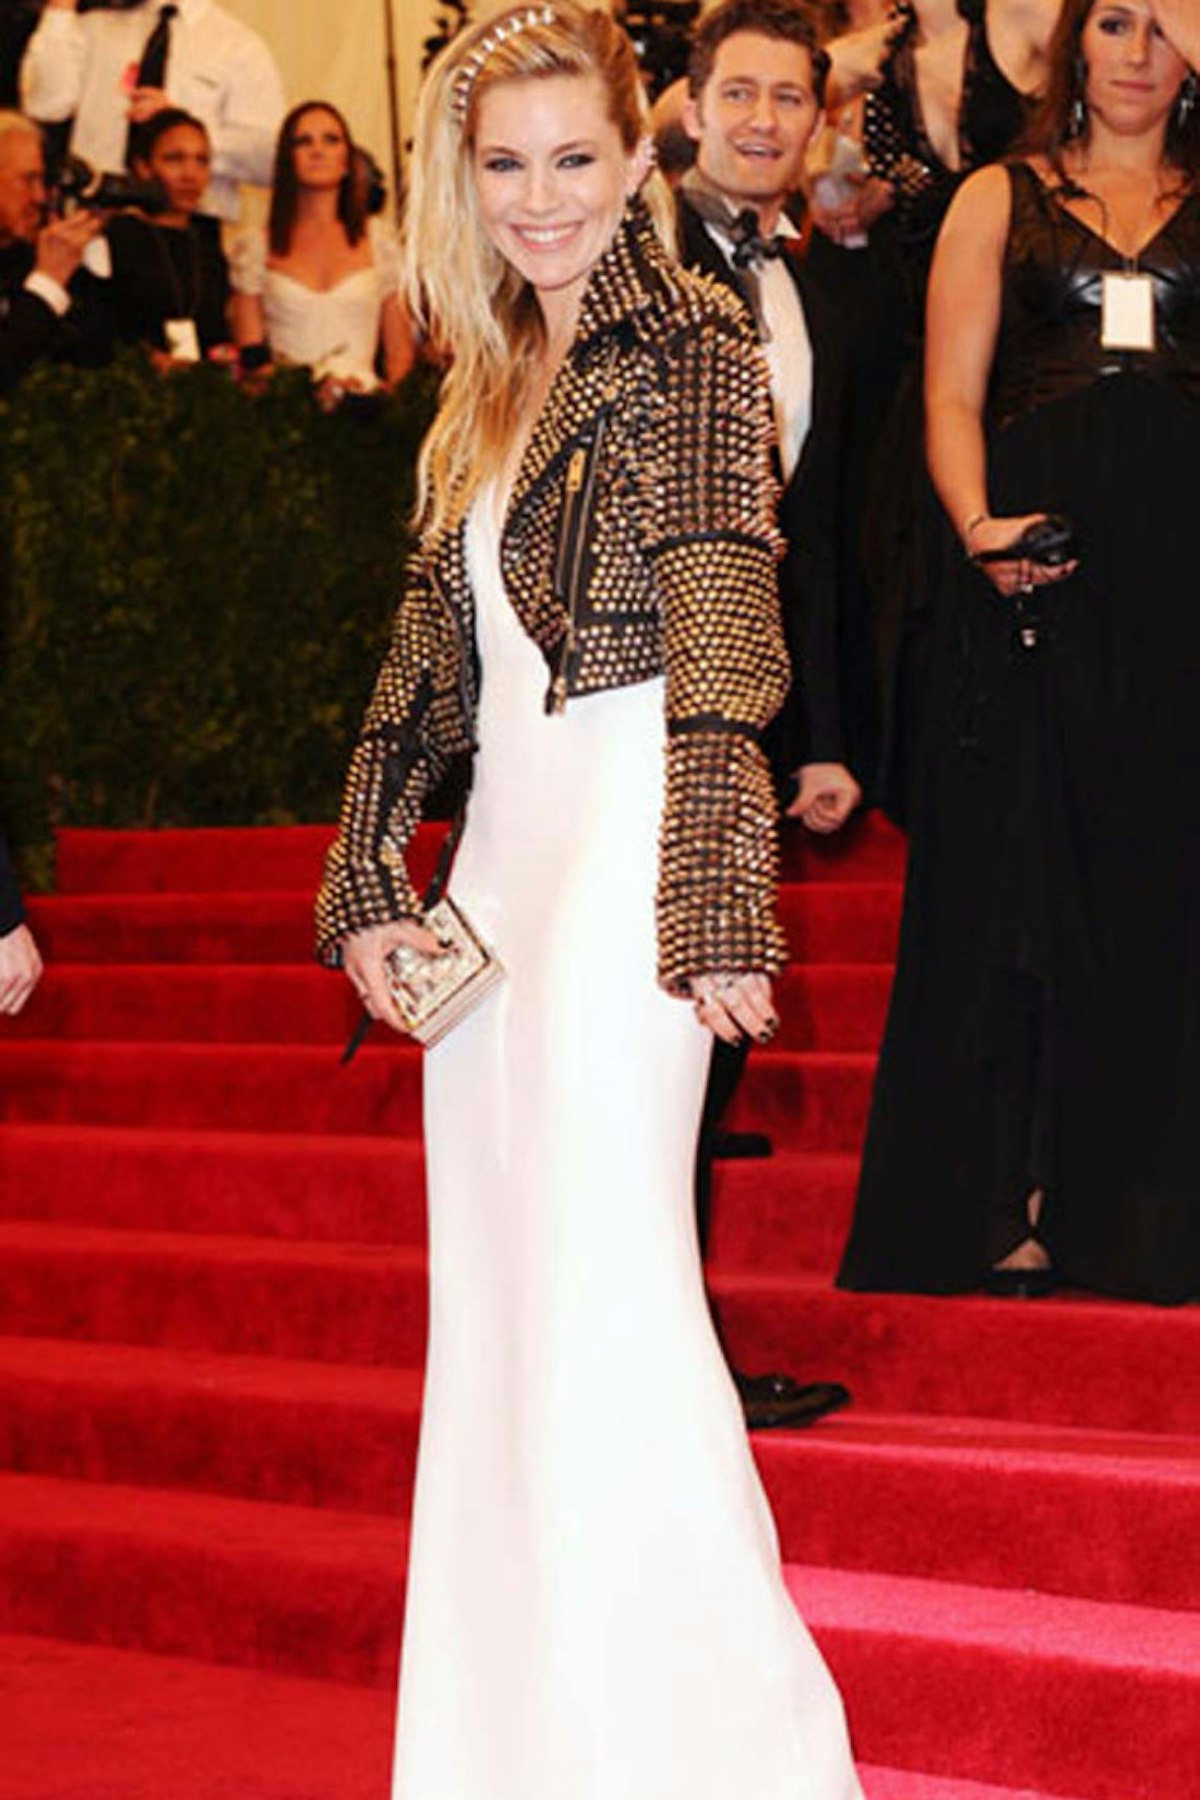 25 Sienna Miller In Burberry At Met Gala   6 May 2013 700x1050 ?auto=format&w=1200&q=80